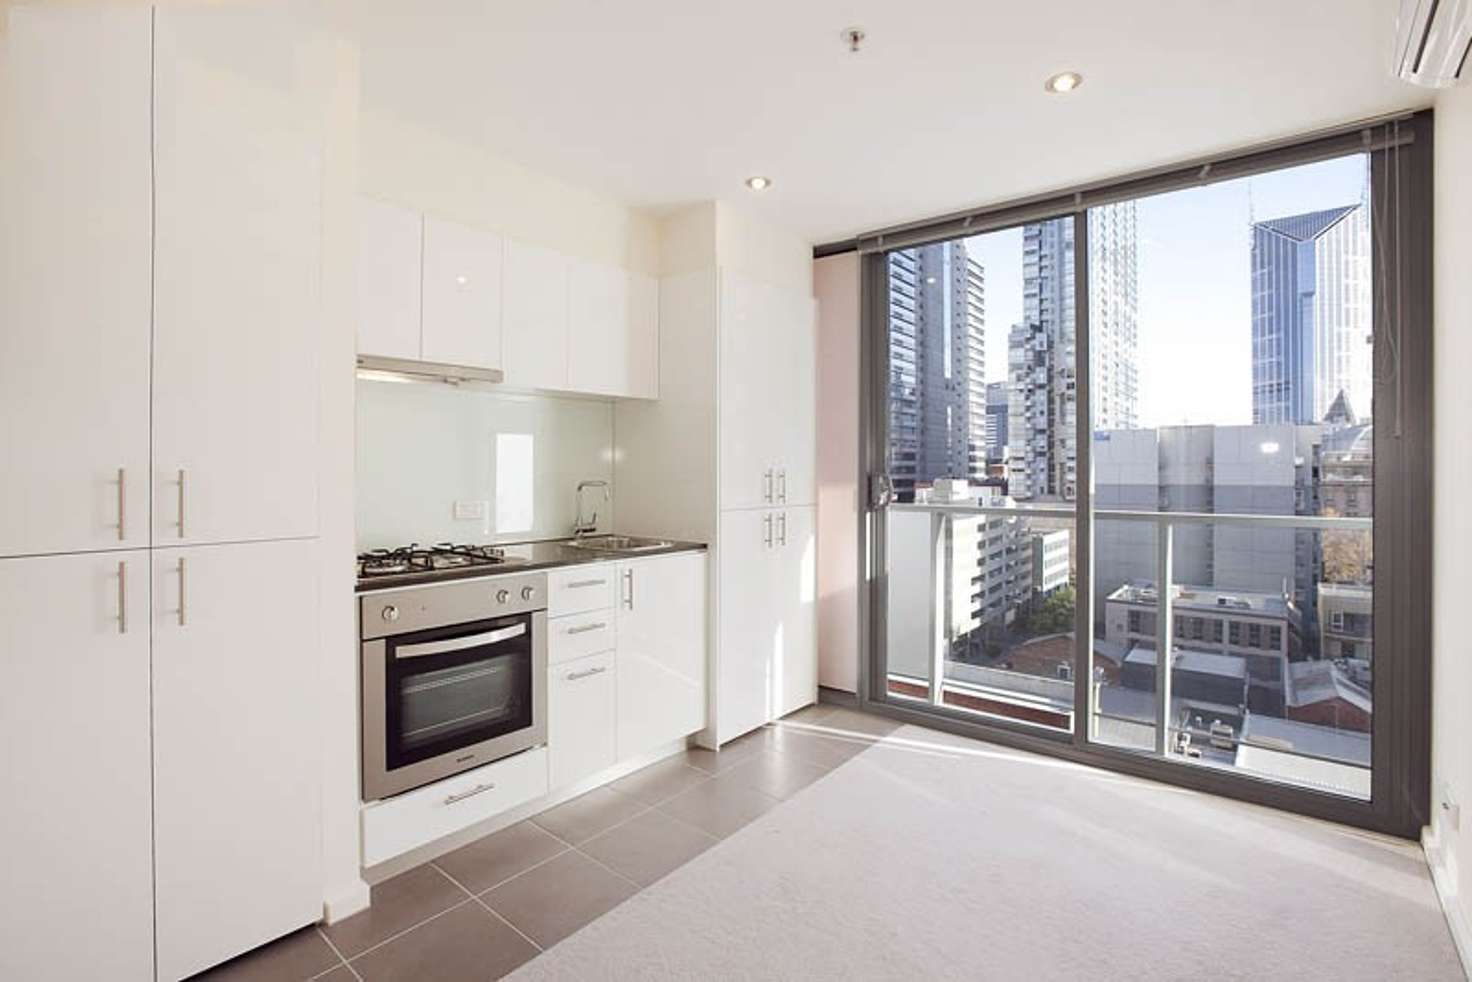 Main view of Homely apartment listing, 804/8 Exploration Lane, Melbourne VIC 3000